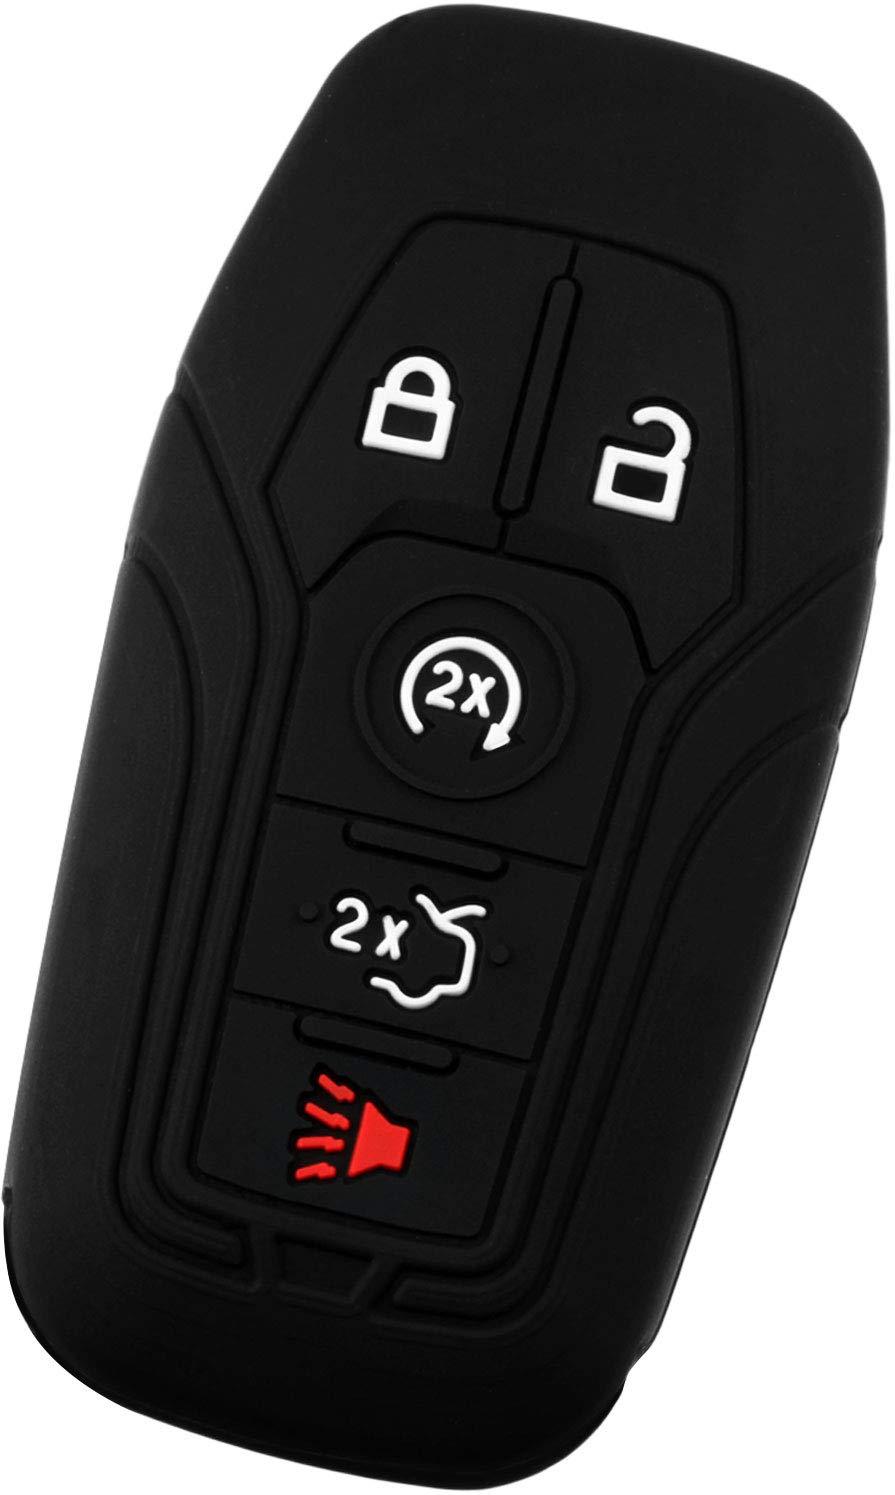  [AUSTRALIA] - KeyGuardz Keyless Entry Remote Car Smart Key Fob Outer Shell Cover Soft Rubber Protective Case for Ford Lincoln M3N-A2C31243800 Black